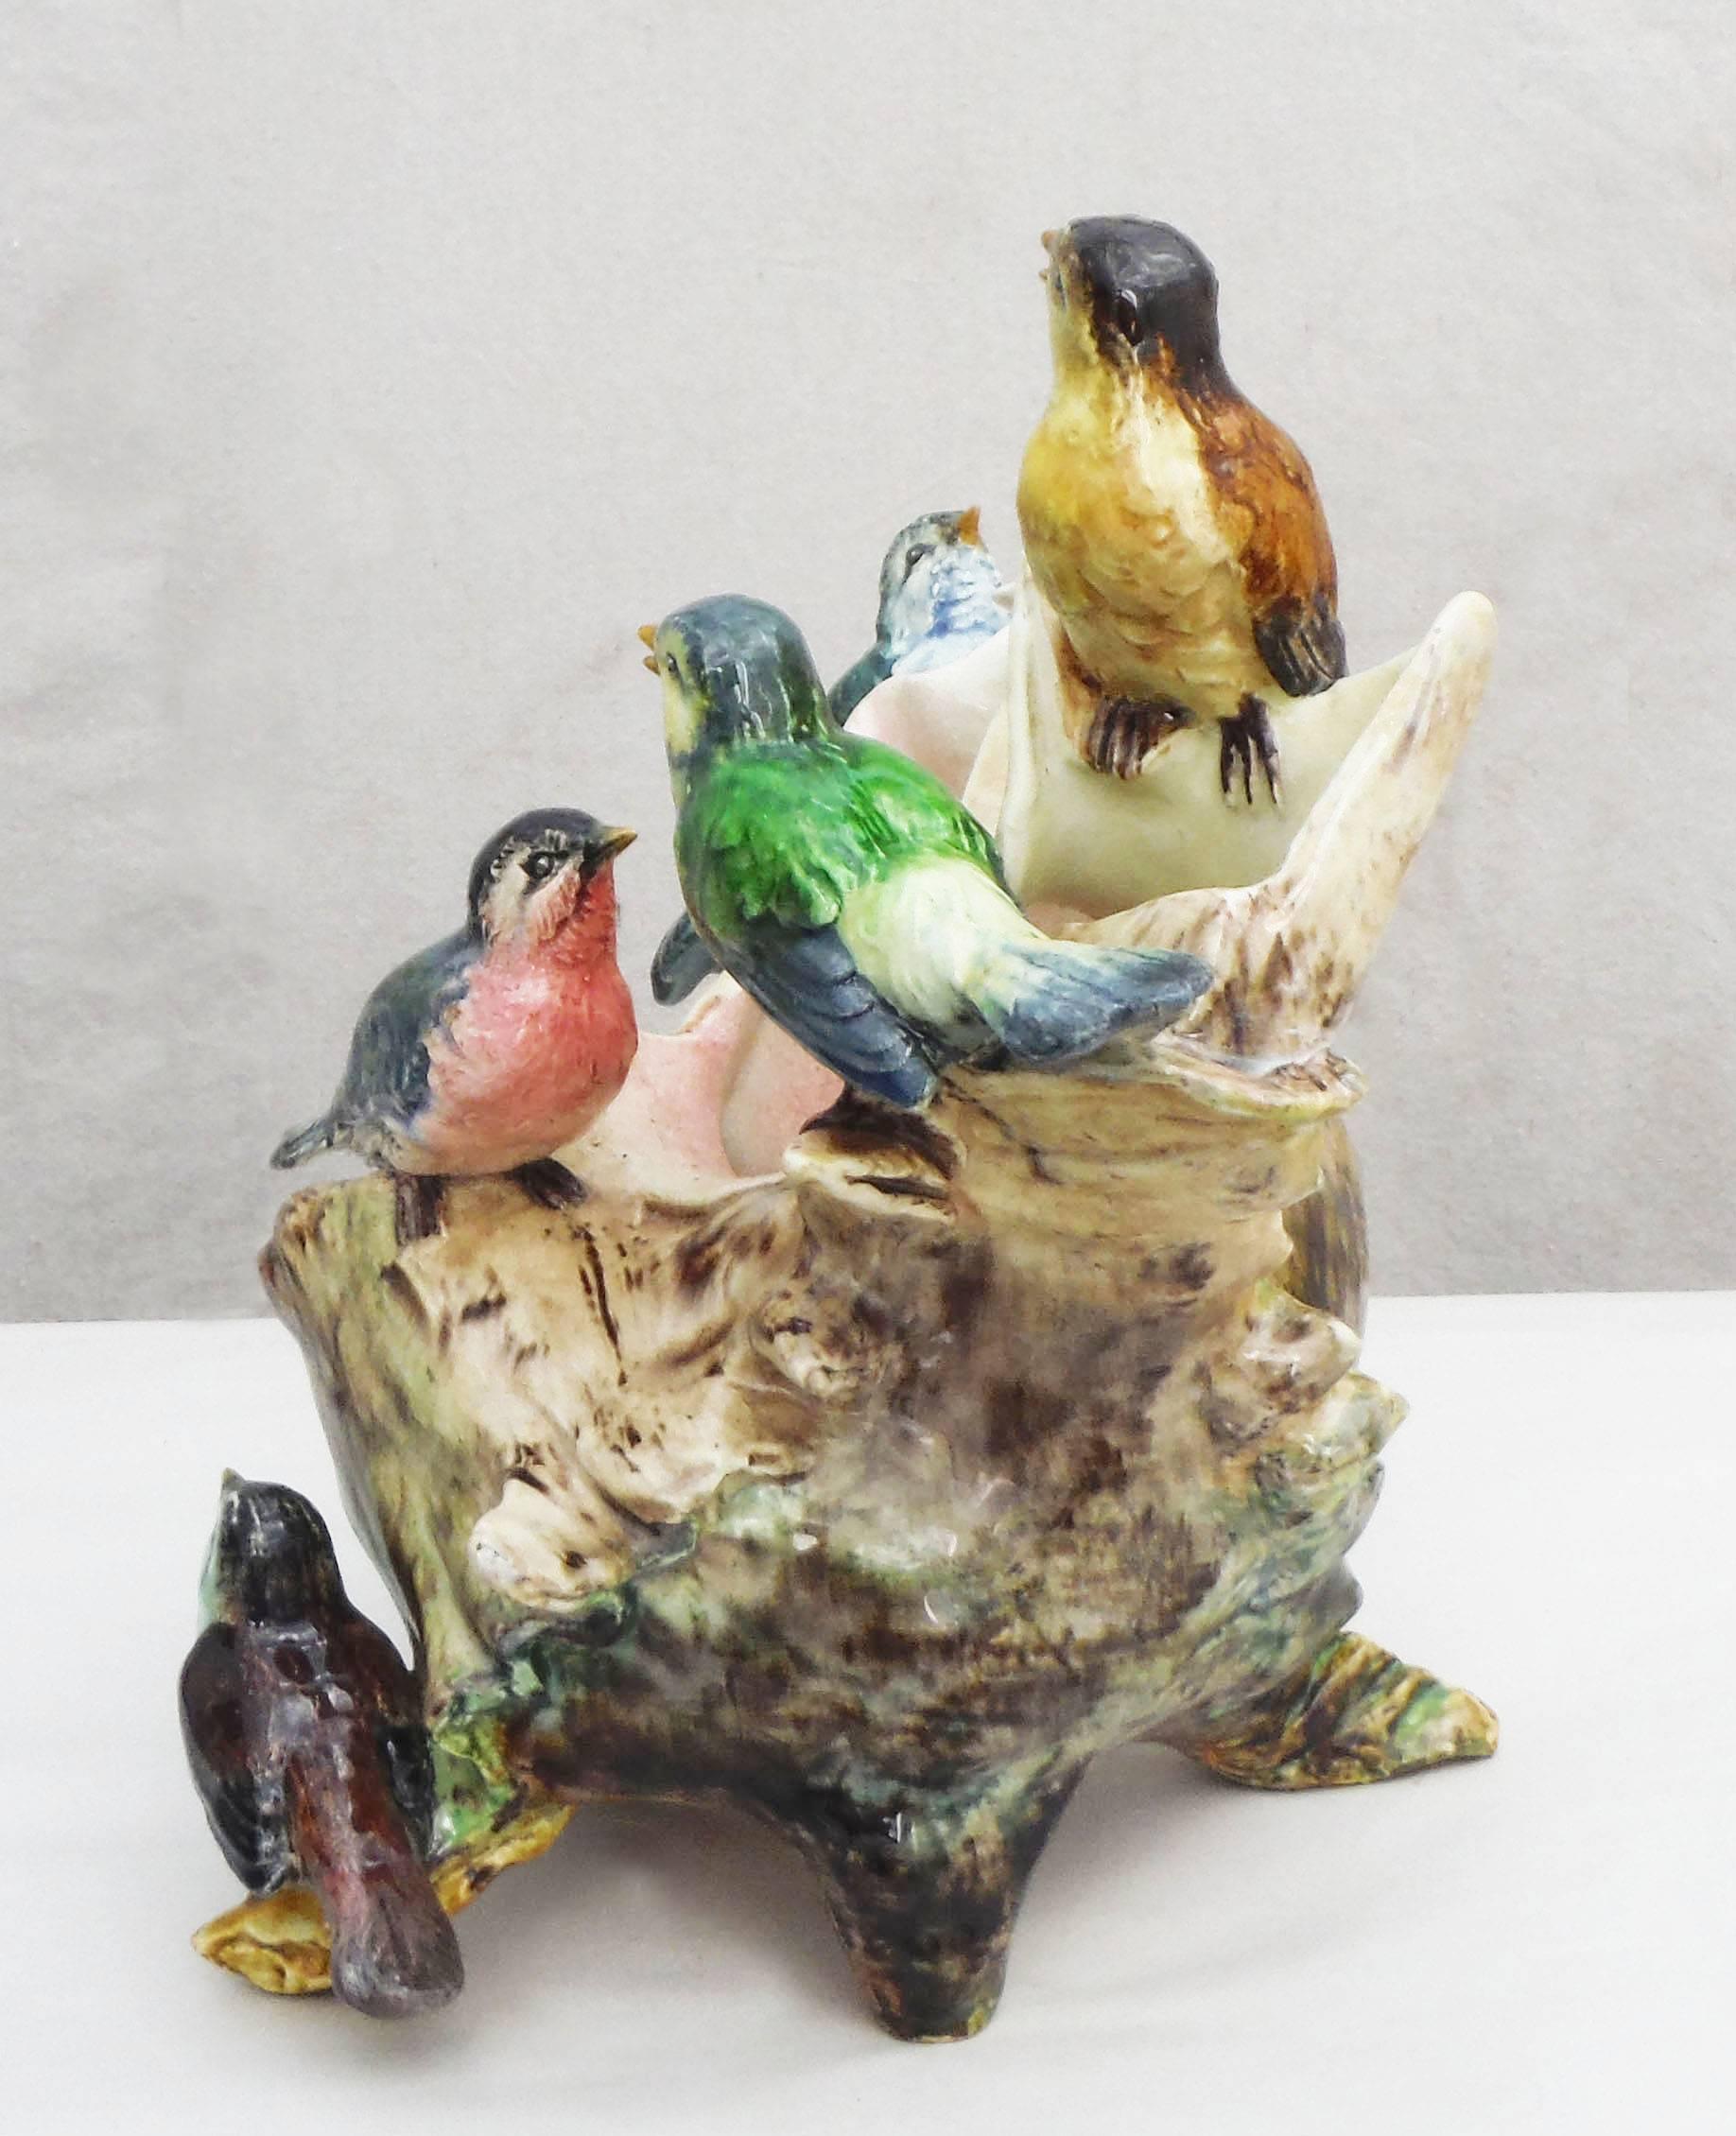 A stunning large Majolica shell with five birds, very colorful signed Delphin Massier.
The Massier are known for the quality of their unique enamels and paintings.
The Massier family produced differents pieces with birds in a very creative style